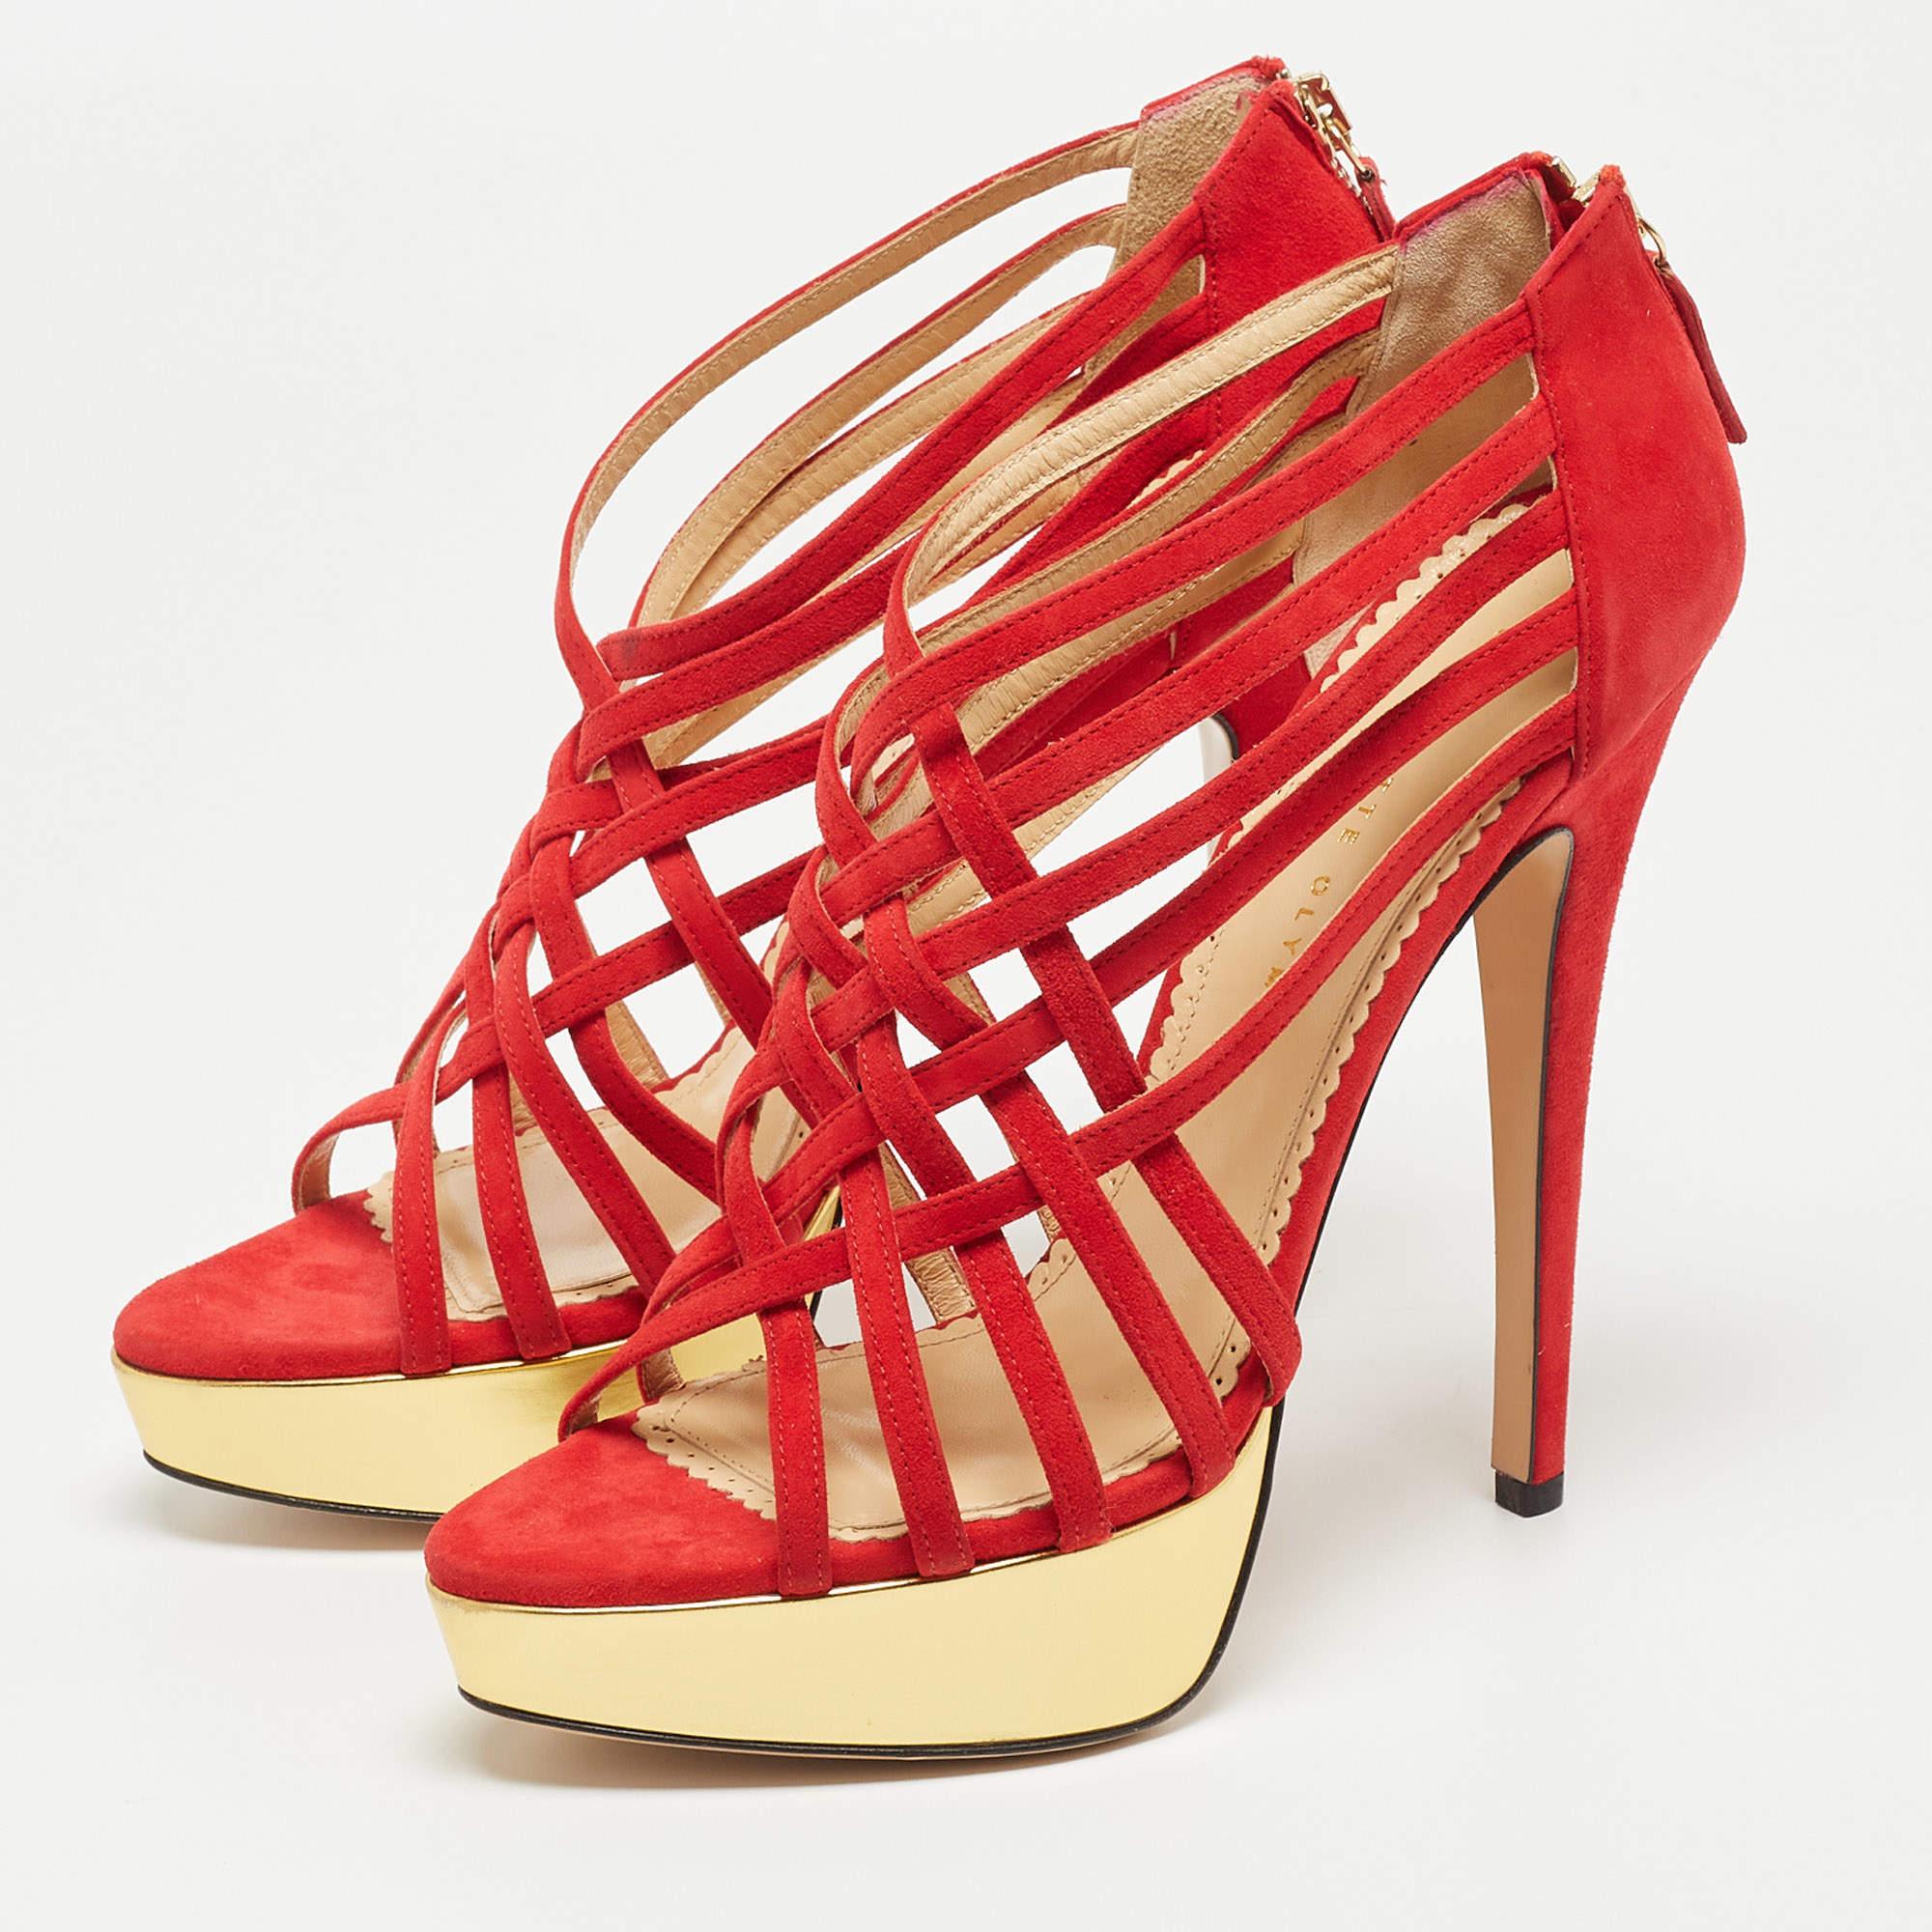 Charlotte Olympia Red Suede Strappy Platform Sandals Size 40 For Sale 7